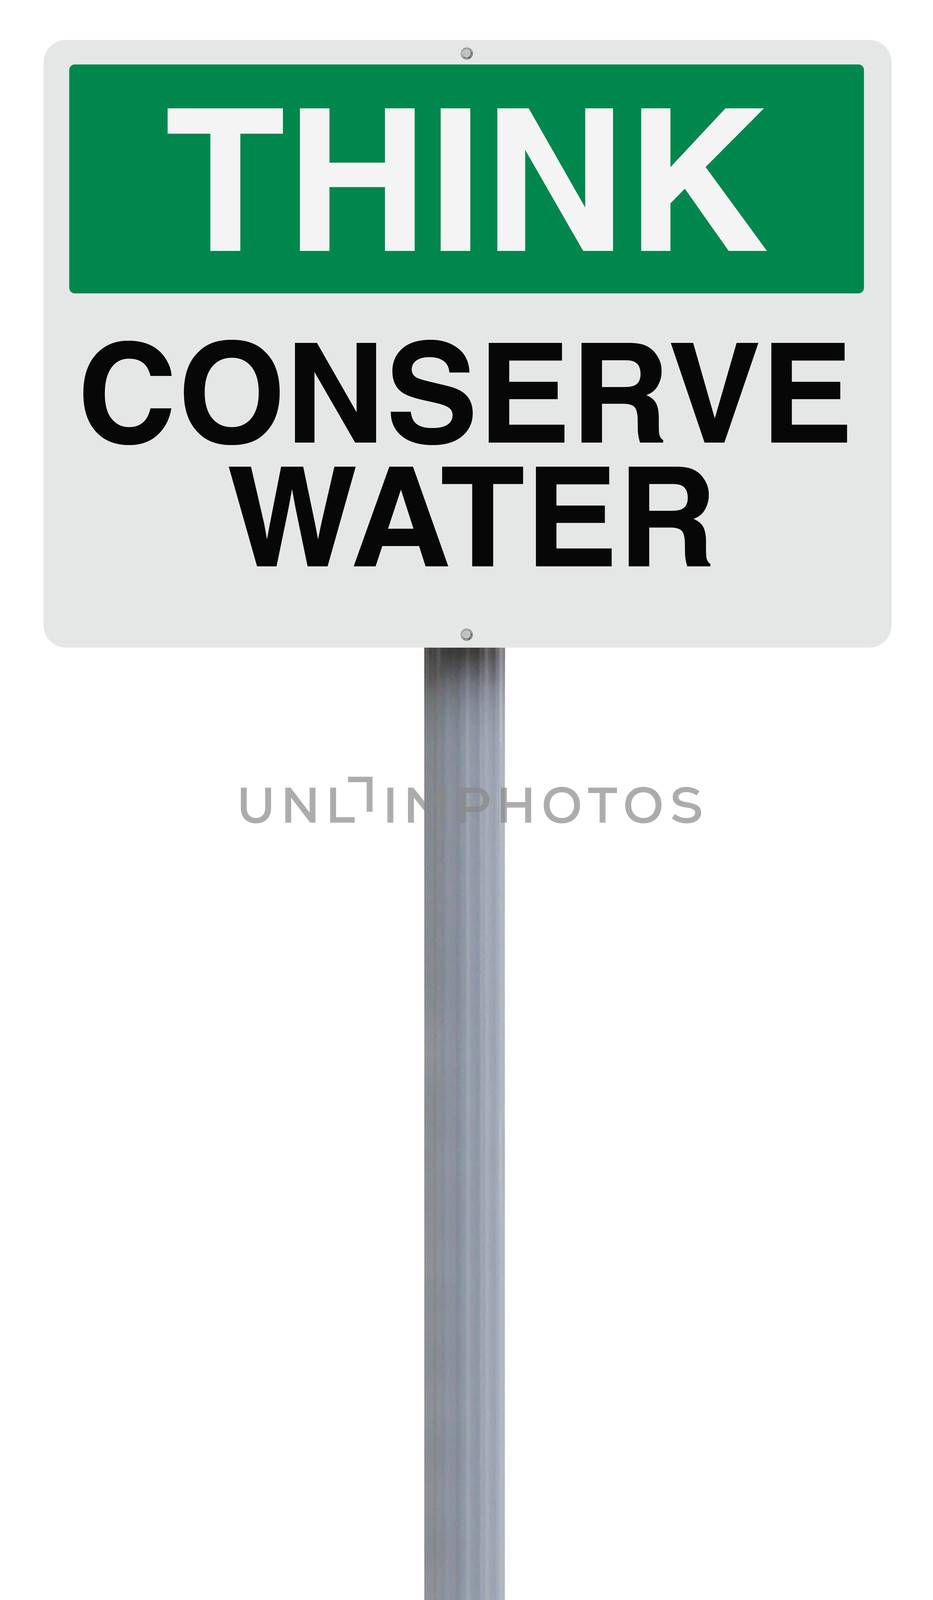 A sign promoting energy conservation